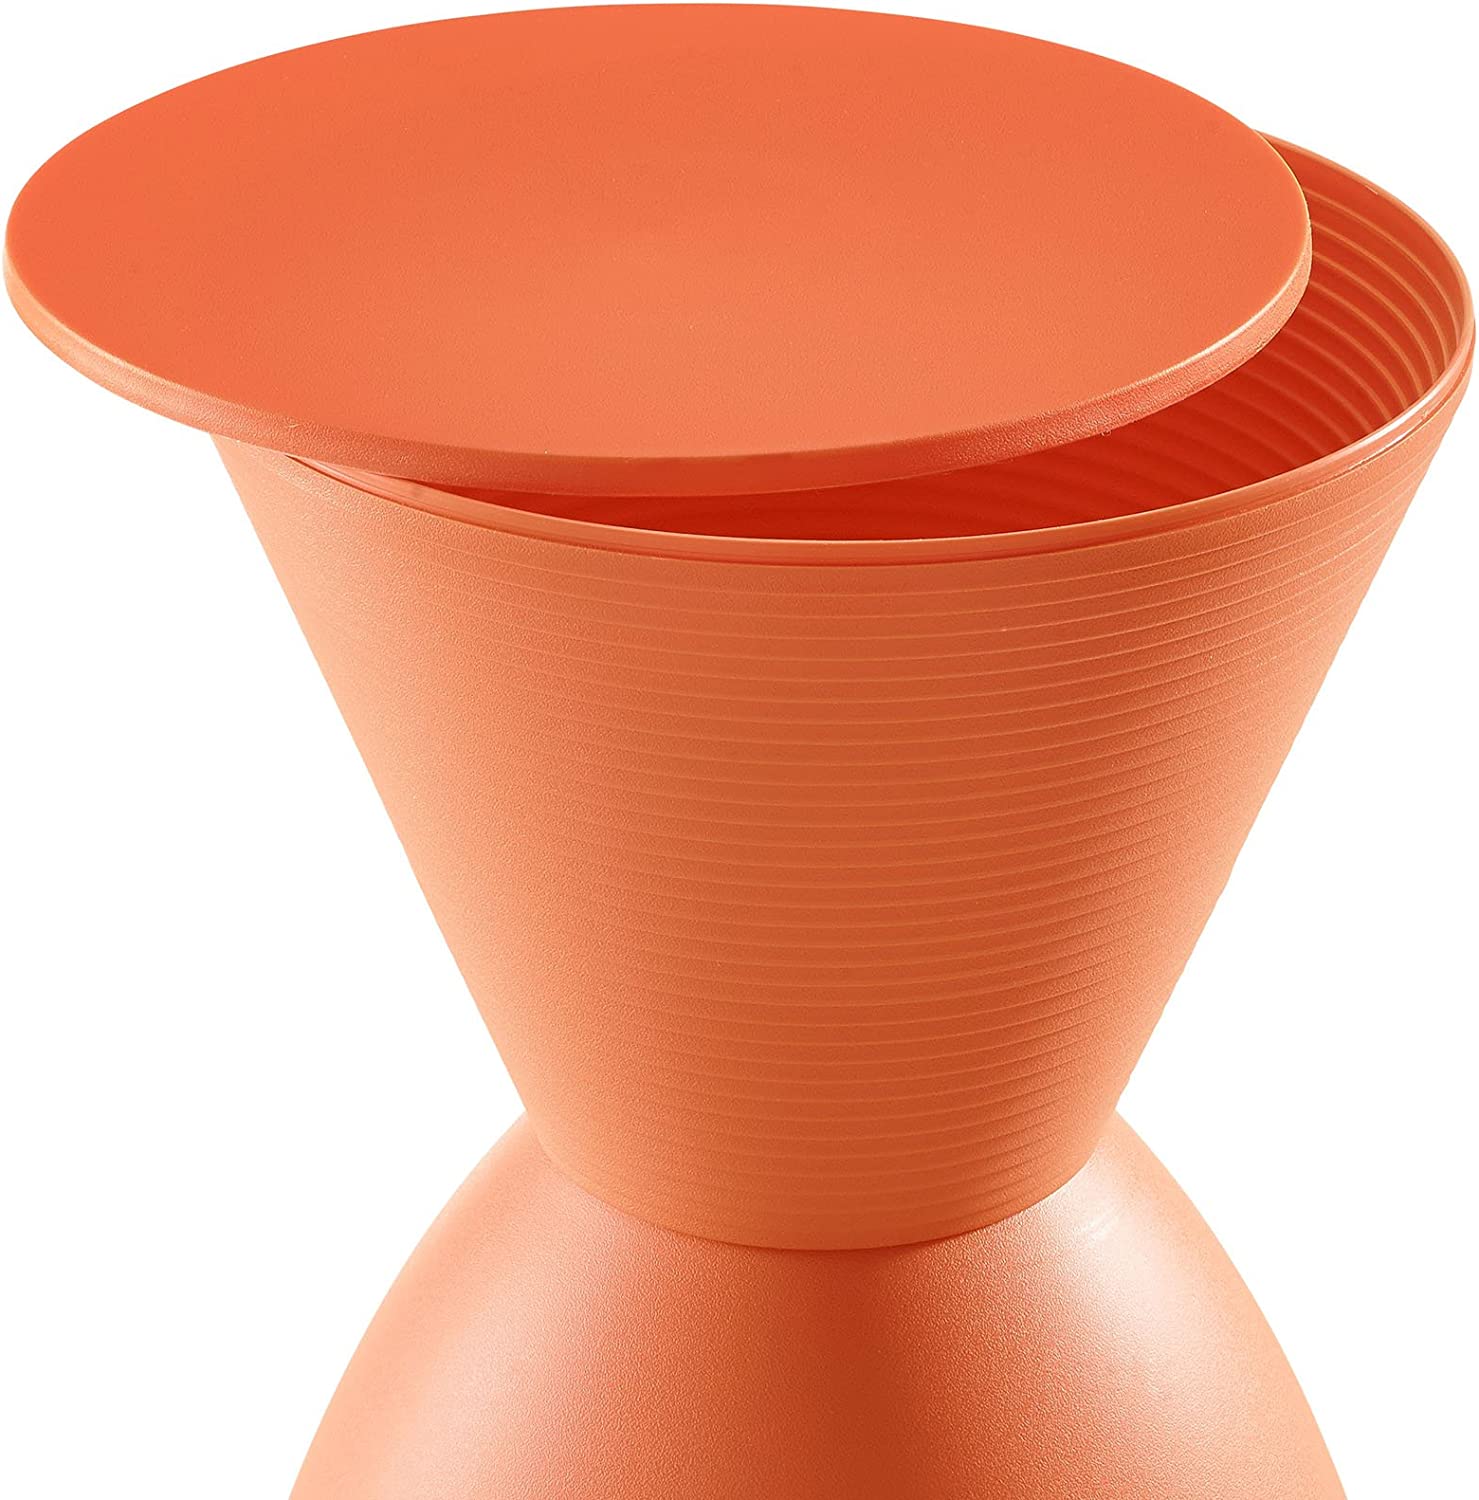 Modway Haste Contemporary Modern Hourglass Accent Stool in Orange